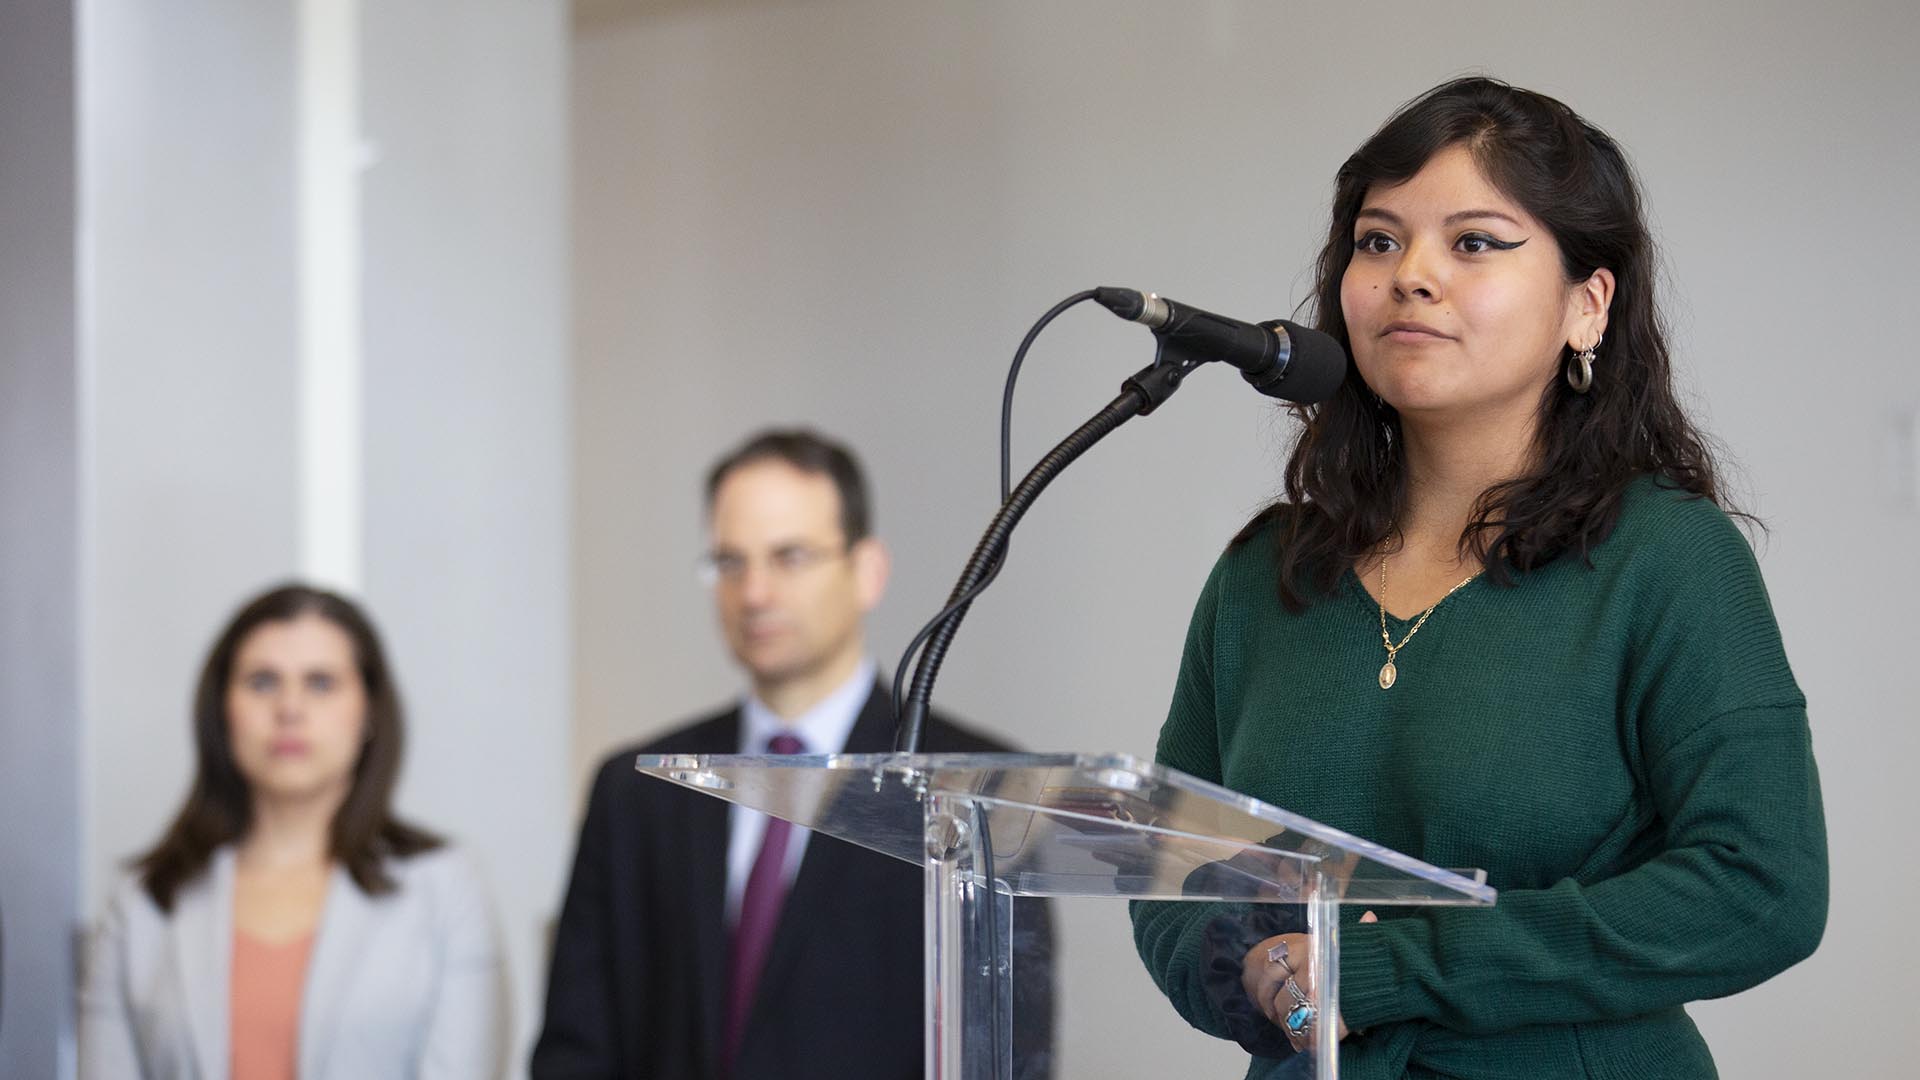 Eunice Callejas Solano speaks at a DACA rally on the Auraria Campus on Nov. 12, 2019.